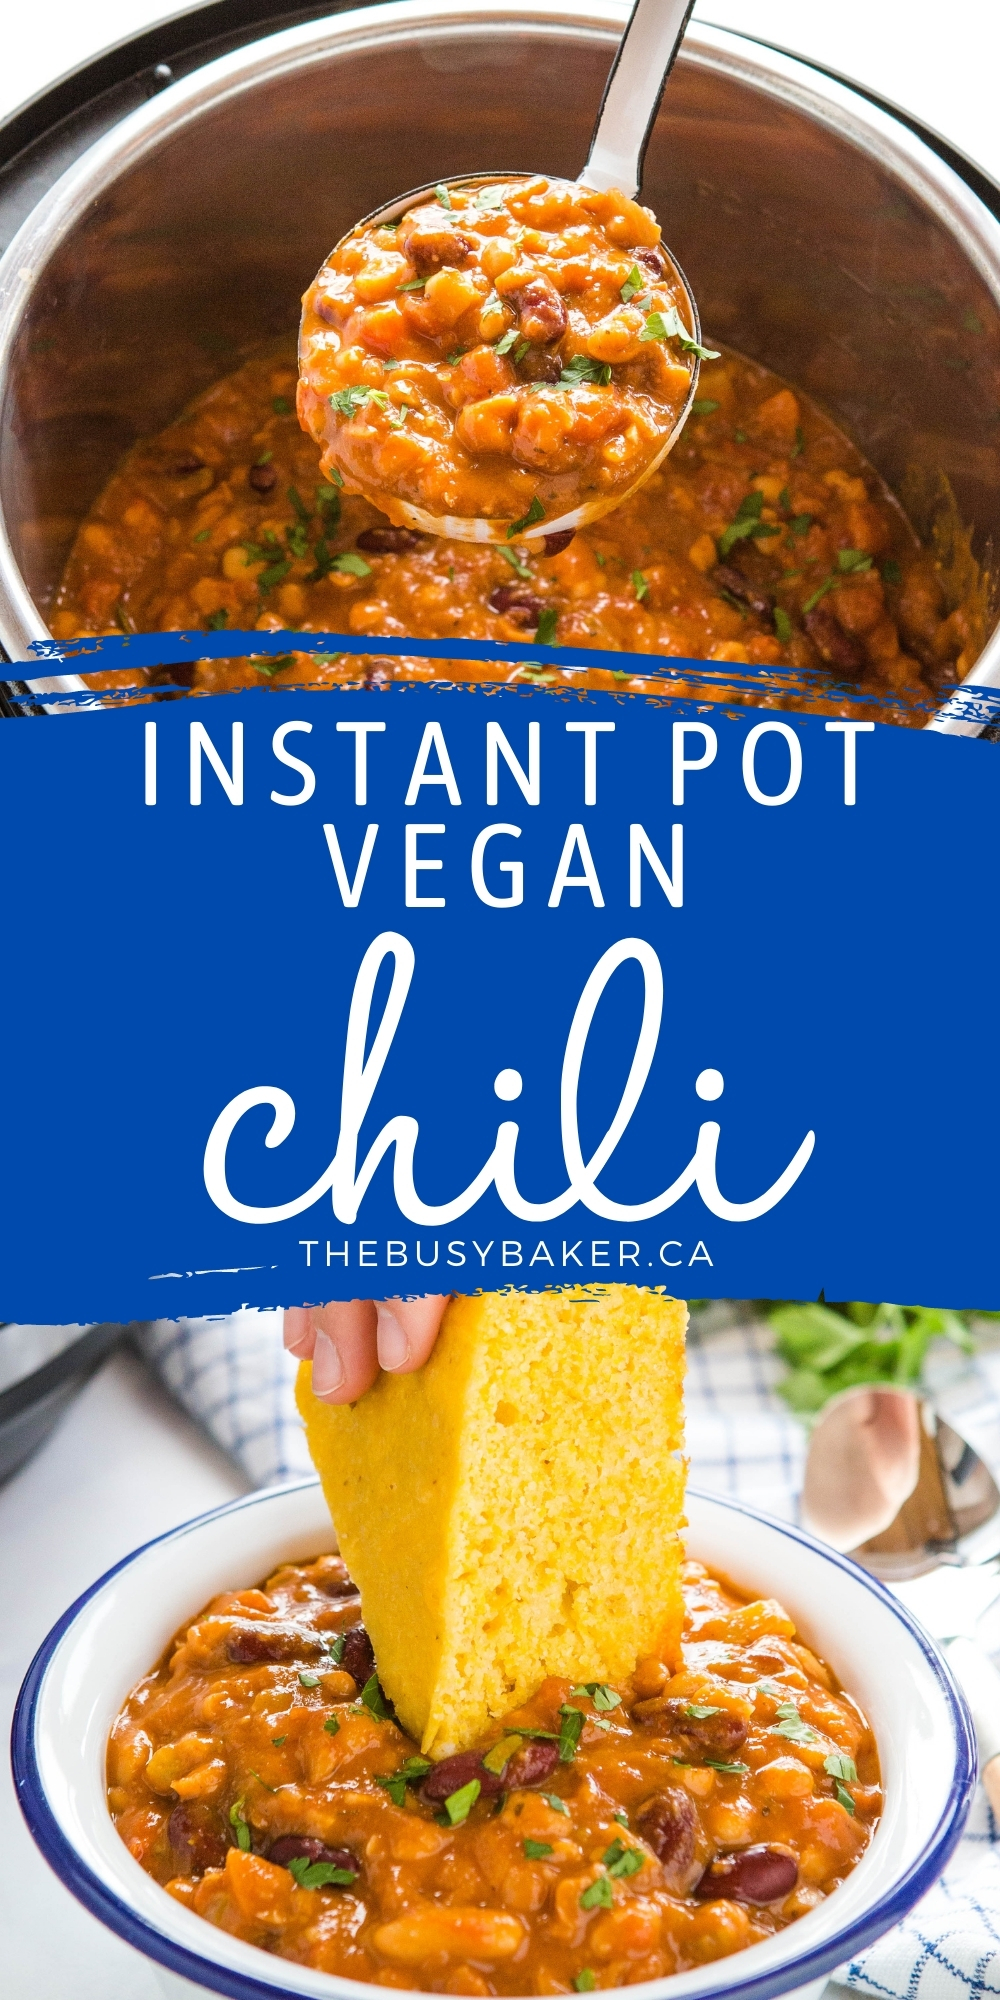 This Instant Pot Vegan Chili is hearty, filling, and packed with plant-based protein and veggies! Easy to make and ready in 25 minutes! Recipe from thebusybaker.ca! #chili #vegan #plantbased #easytomake #healthy #veggies #familymeal #easymeal #instantpot via @busybakerblog